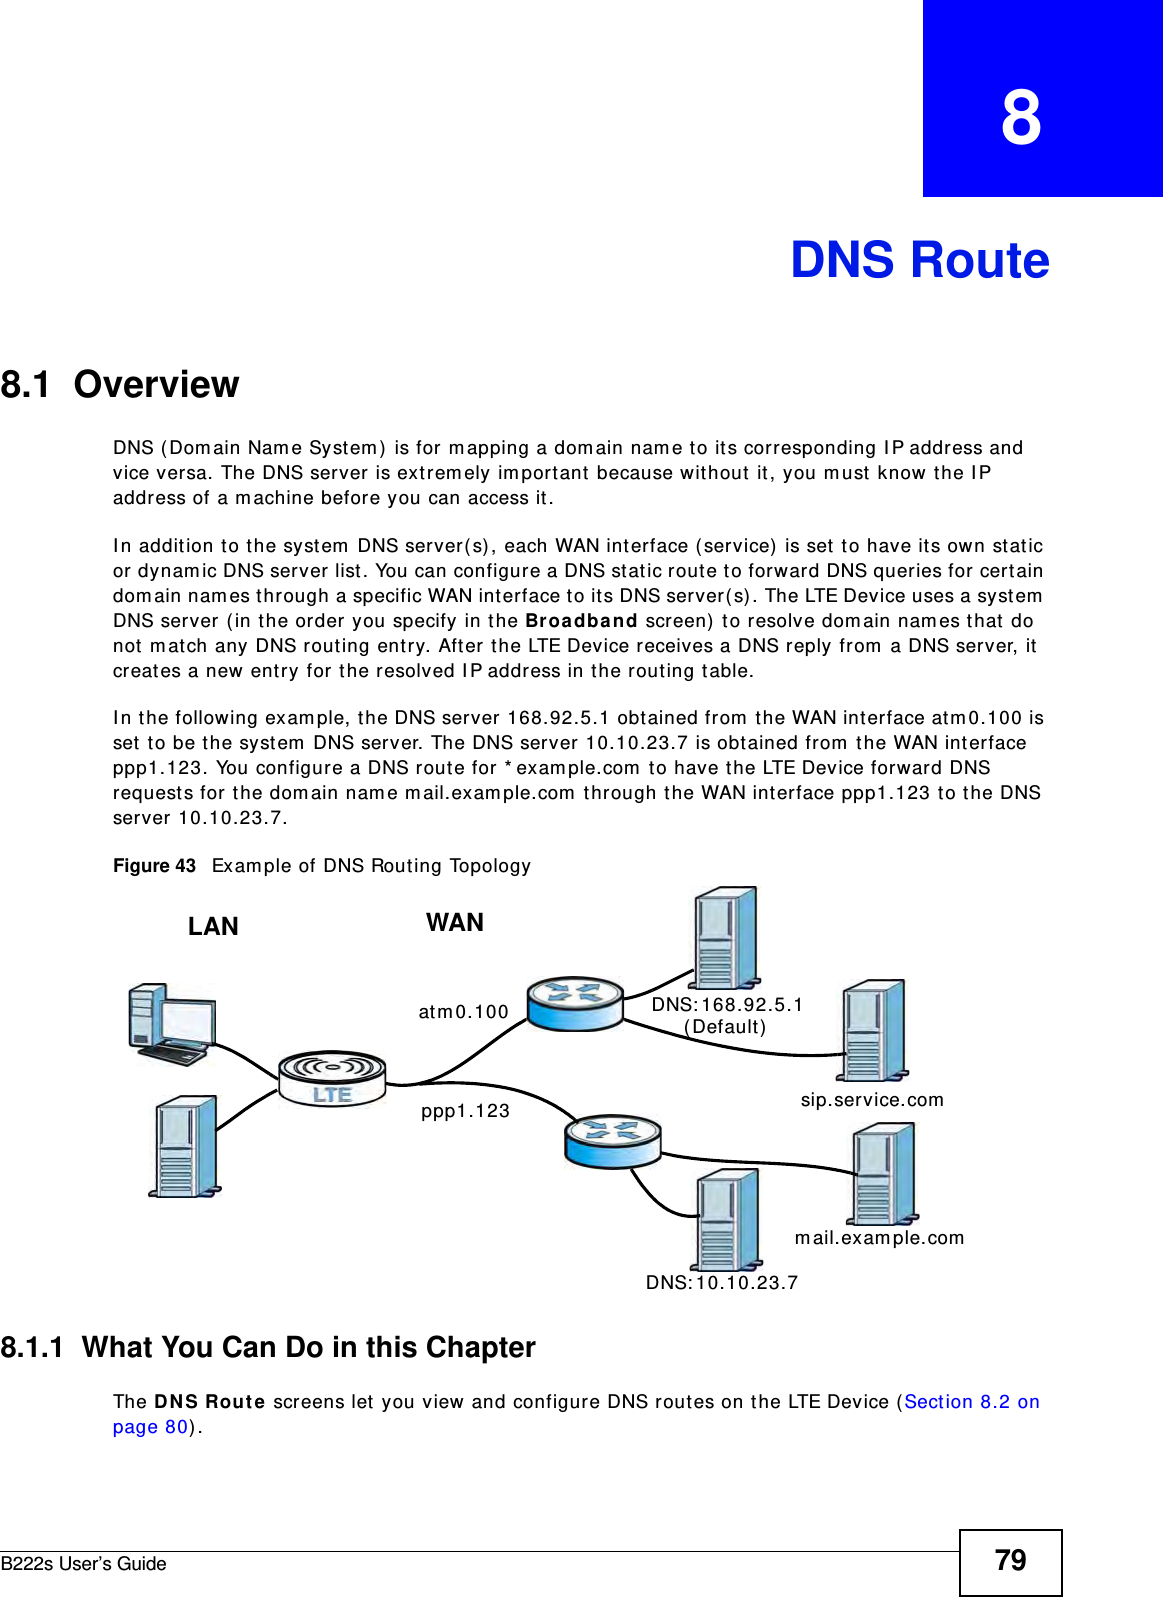 B222s User’s Guide 79CHAPTER   8DNS Route8.1  Overview   DNS ( Dom ain Nam e System )  is for m apping a dom ain nam e t o its corresponding I P address and vice versa. The DNS server is ext rem ely im port ant  because wit hout  it , you m ust know the I P address of a m achine befor e you can access it. I n addition t o t he system  DNS server( s) , each WAN interface ( service)  is set  to have it s own stat ic or dynam ic DNS server list. You can configure a DNS stat ic rout e t o forward DNS queries for cert ain dom ain nam es t hrough a specific WAN int erface t o its DNS server( s). The LTE Device uses a system  DNS server (in t he order you specify in t he Broa dband screen)  t o resolve dom ain nam es t hat  do not  m atch any DNS rout ing ent ry. Aft er t he LTE Device receives a DNS reply from  a DNS ser ver, it  creat es a new ent ry for t he resolved I P address in t he routing table.I n t he following exam ple, t he DNS server 168.92.5.1 obt ained from  t he WAN interface atm 0.100 is set  t o be t he system  DNS server. The DNS server 10.10.23.7 is obt ained from  t he WAN int erface ppp1.123. You configure a DNS rout e for * exam ple.com  t o have t he LTE Device forward DNS request s for t he dom ain nam e m ail.exam ple.com  t hrough the WAN int erface ppp1.123 t o t he DNS server 10.10.23.7.Figure 43   Exam ple of DNS Rout ing Topology8.1.1  What You Can Do in this ChapterThe DN S Rou t e screens let  you view and configure DNS rout es on the LTE Device (Section 8.2 on page 80) .WANLANat m 0.100ppp1.123DNS: 10.10.23.7DNS: 168.92.5.1sip.service.comm ail.exam ple.com( Default )